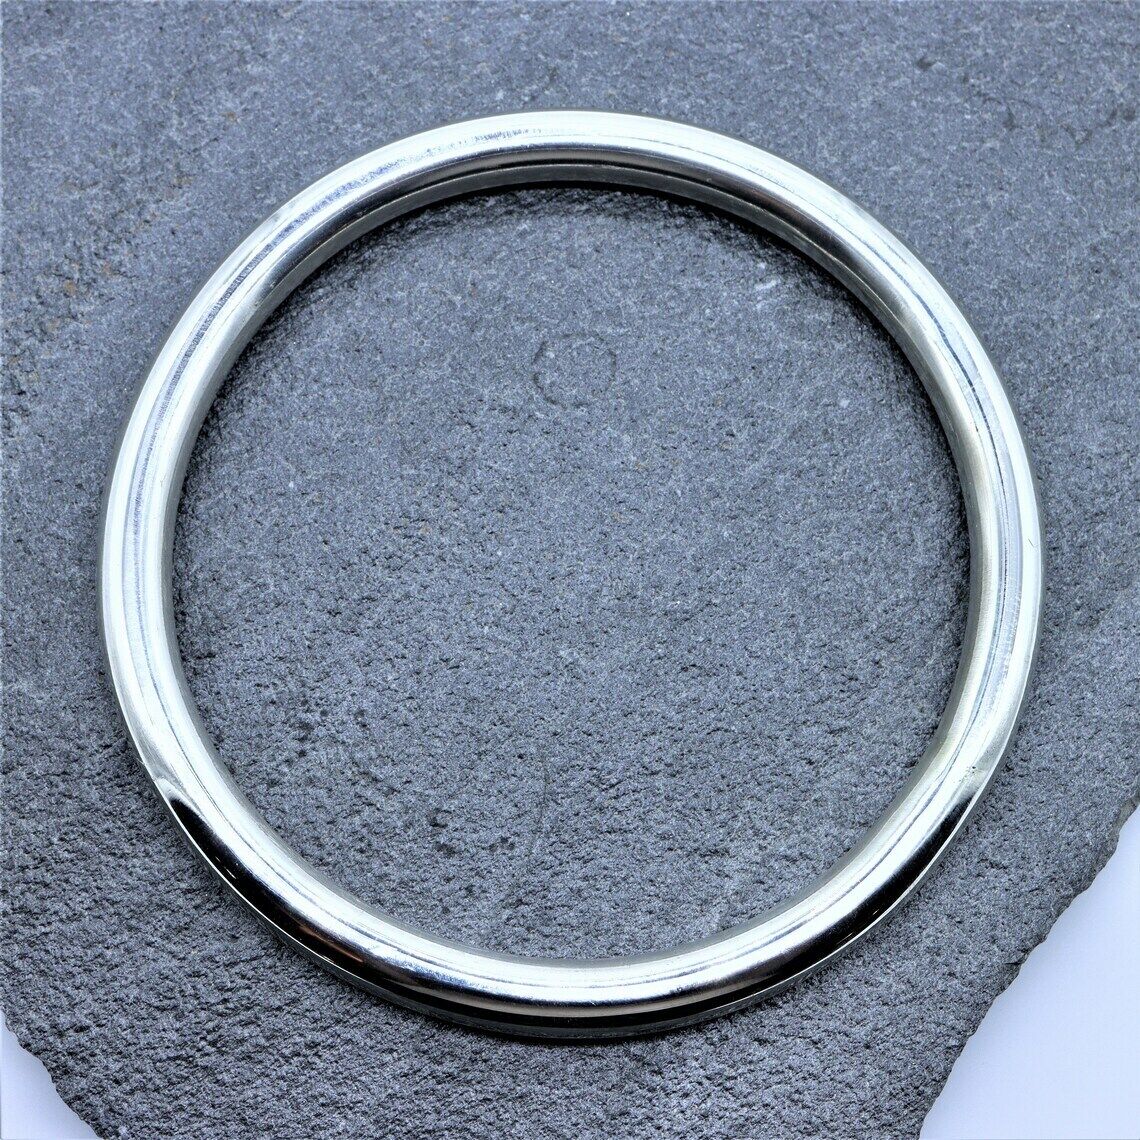 SUPER MASSIVE HEAVY 1G 7.25mm Thick Chunky Solid Sterling Silver Bangle Bracelet